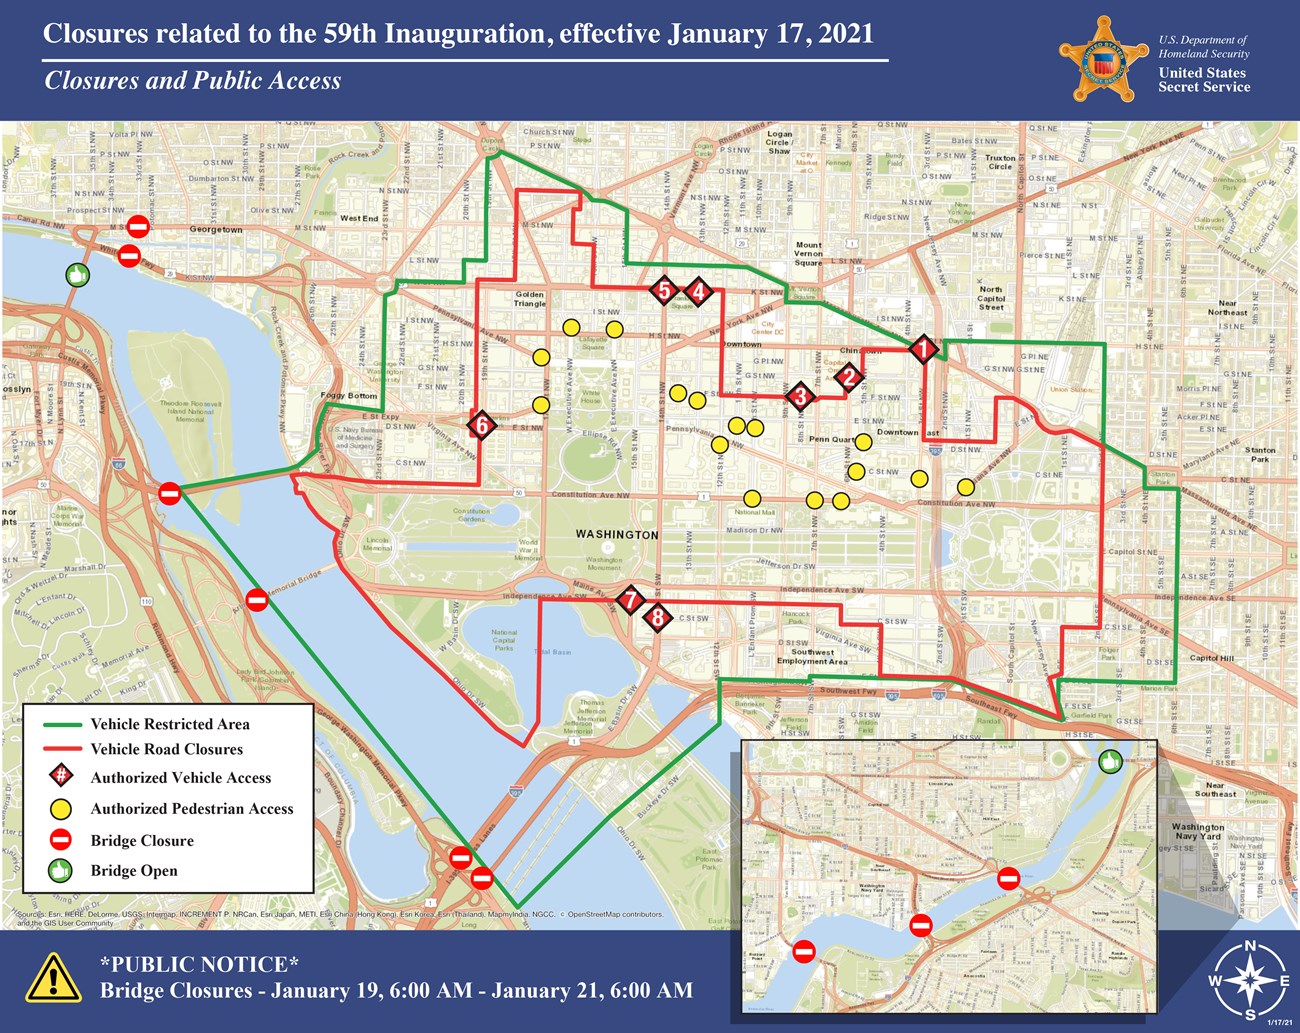 Map for a general reference of closures in Washington DC January 17-21; detailed alt text on the webpage